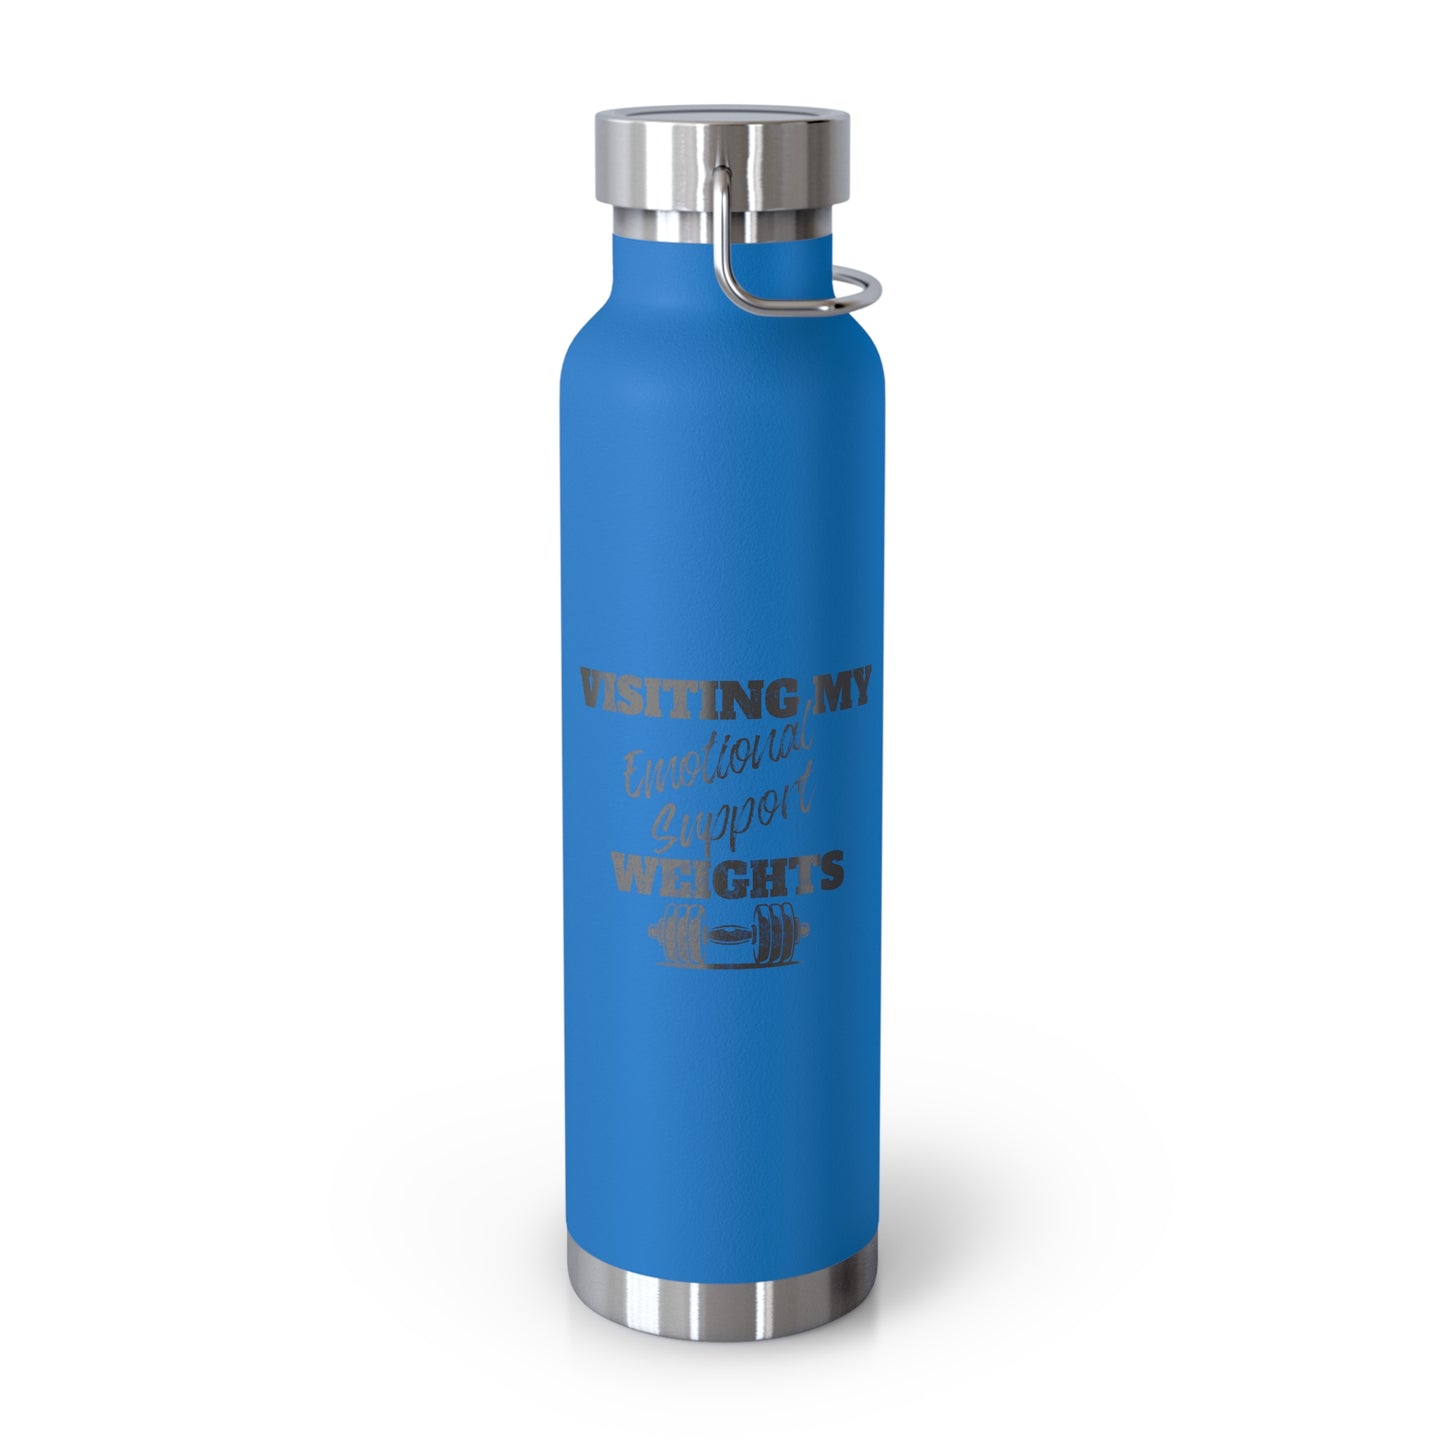 Emotional Support Weights Copper Vacuum Insulated Bottle, 22oz